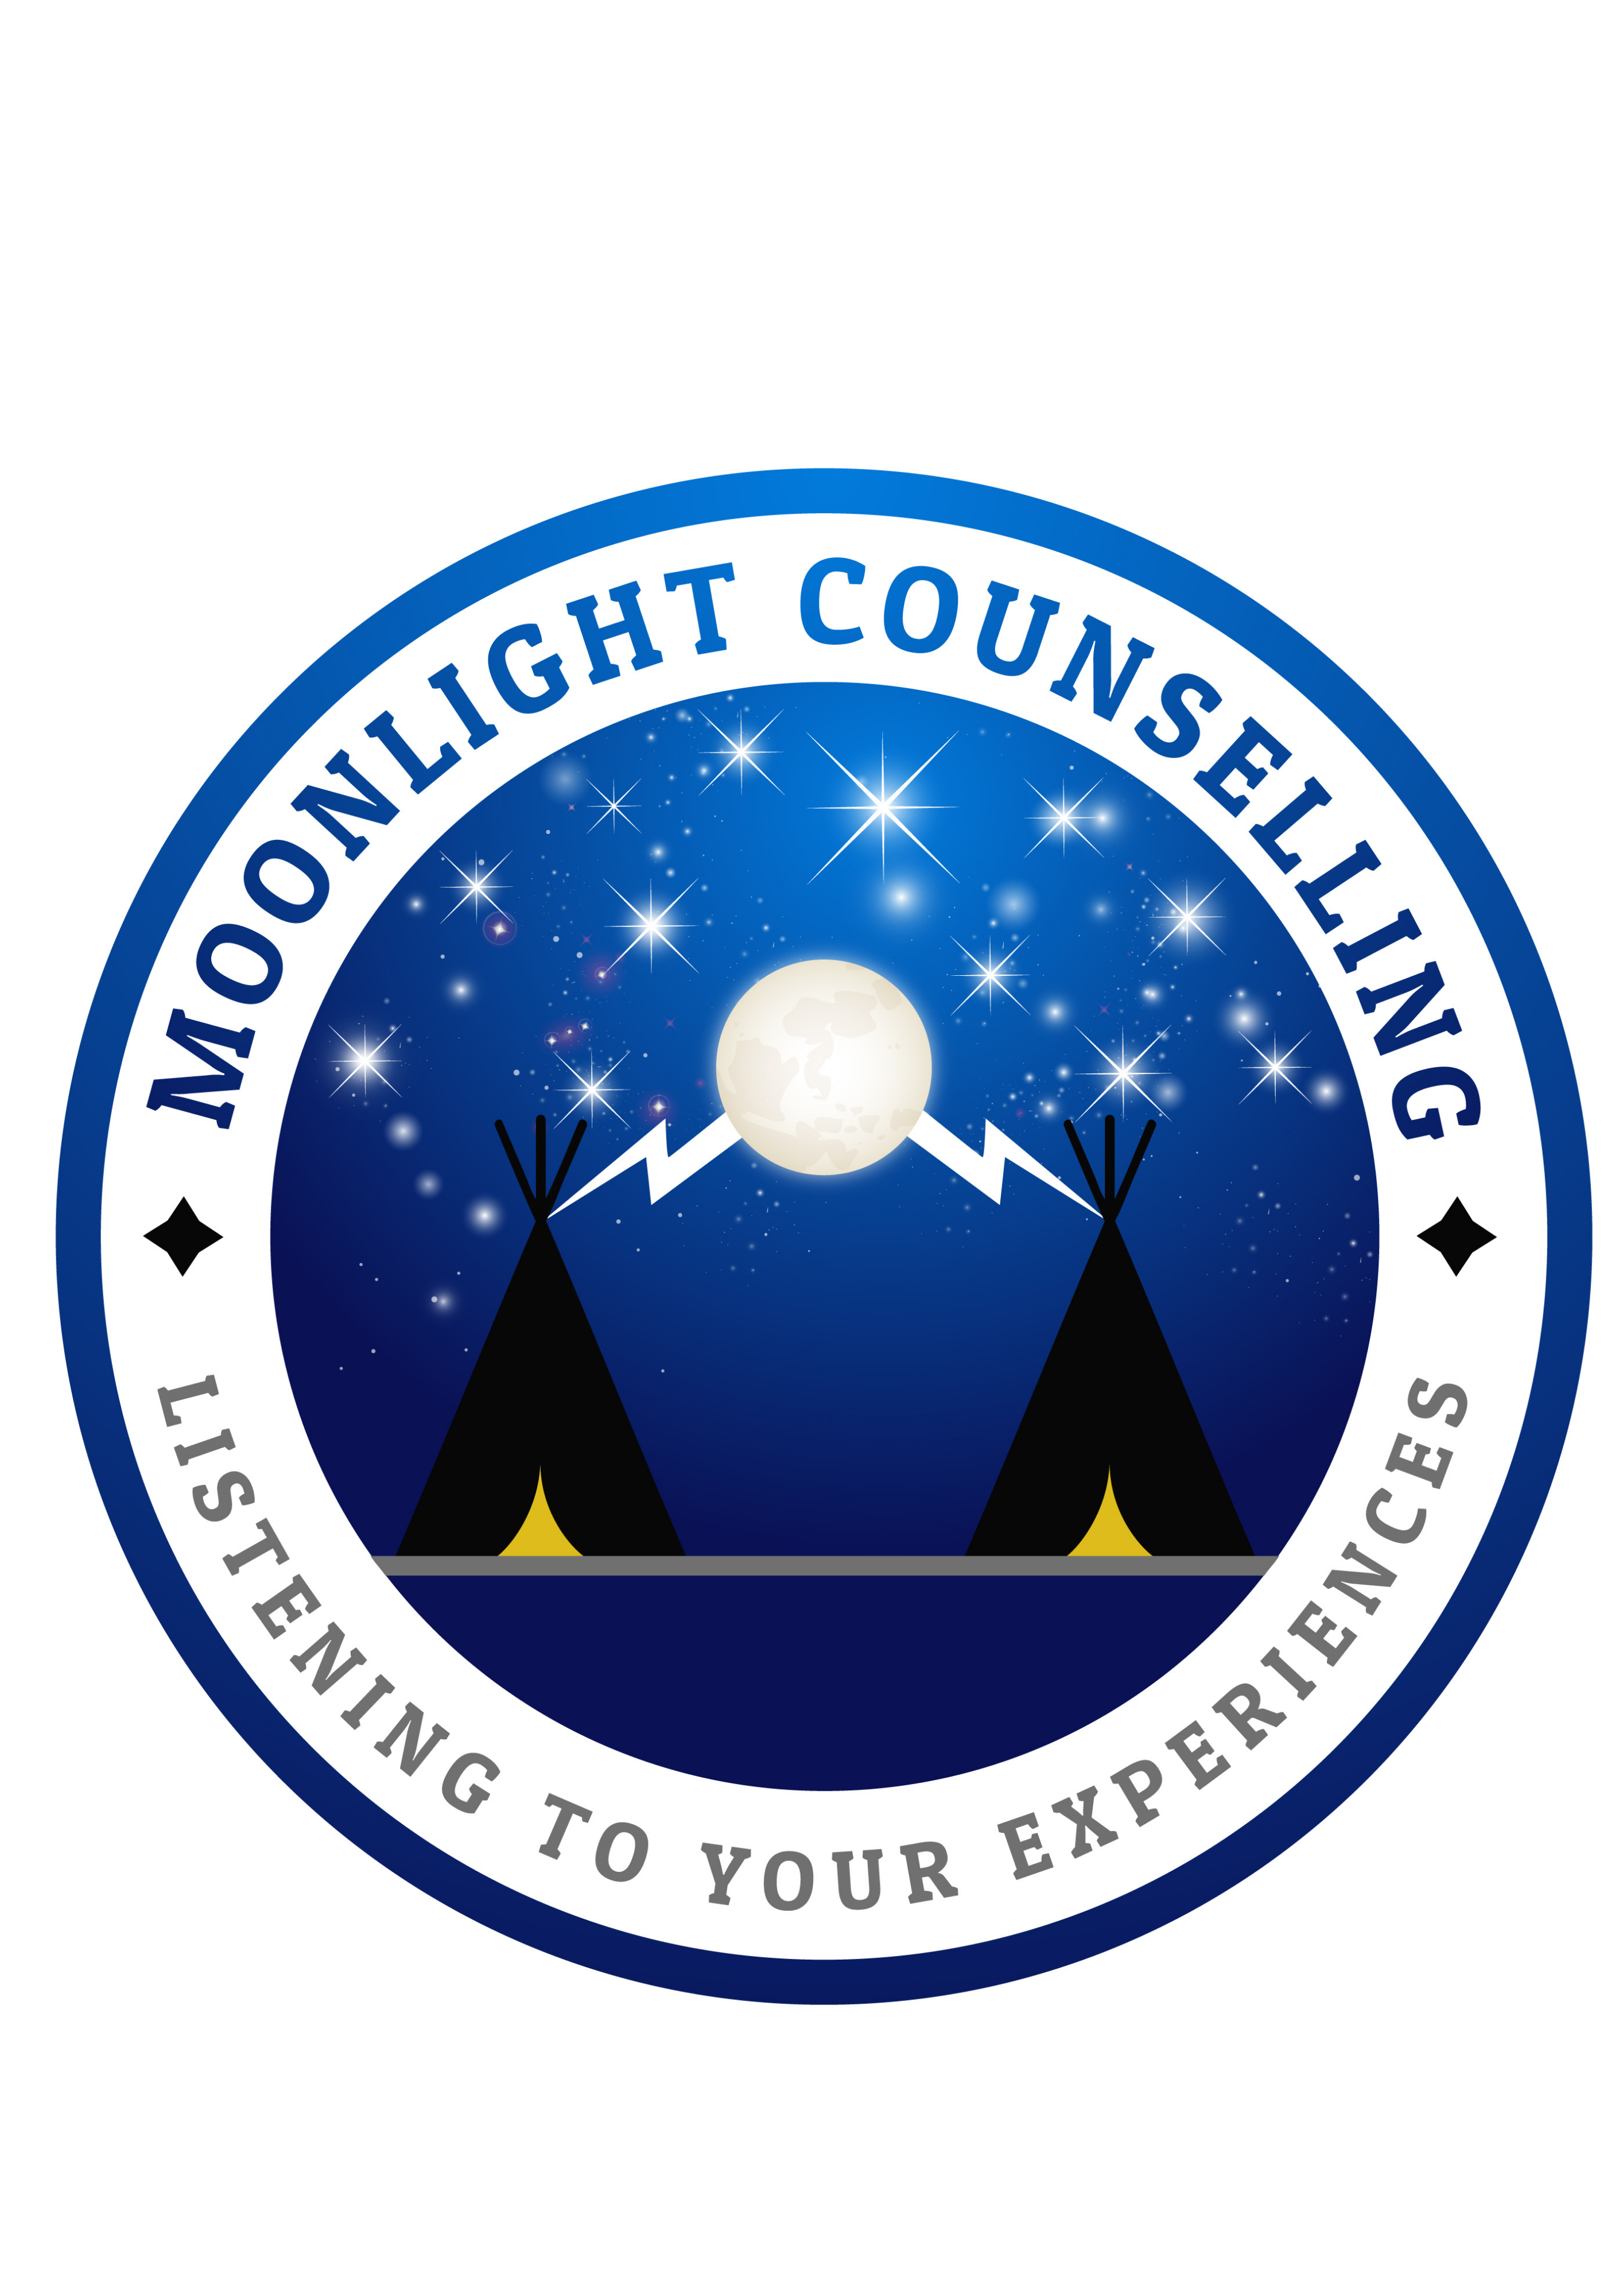 Moonlight Counselling